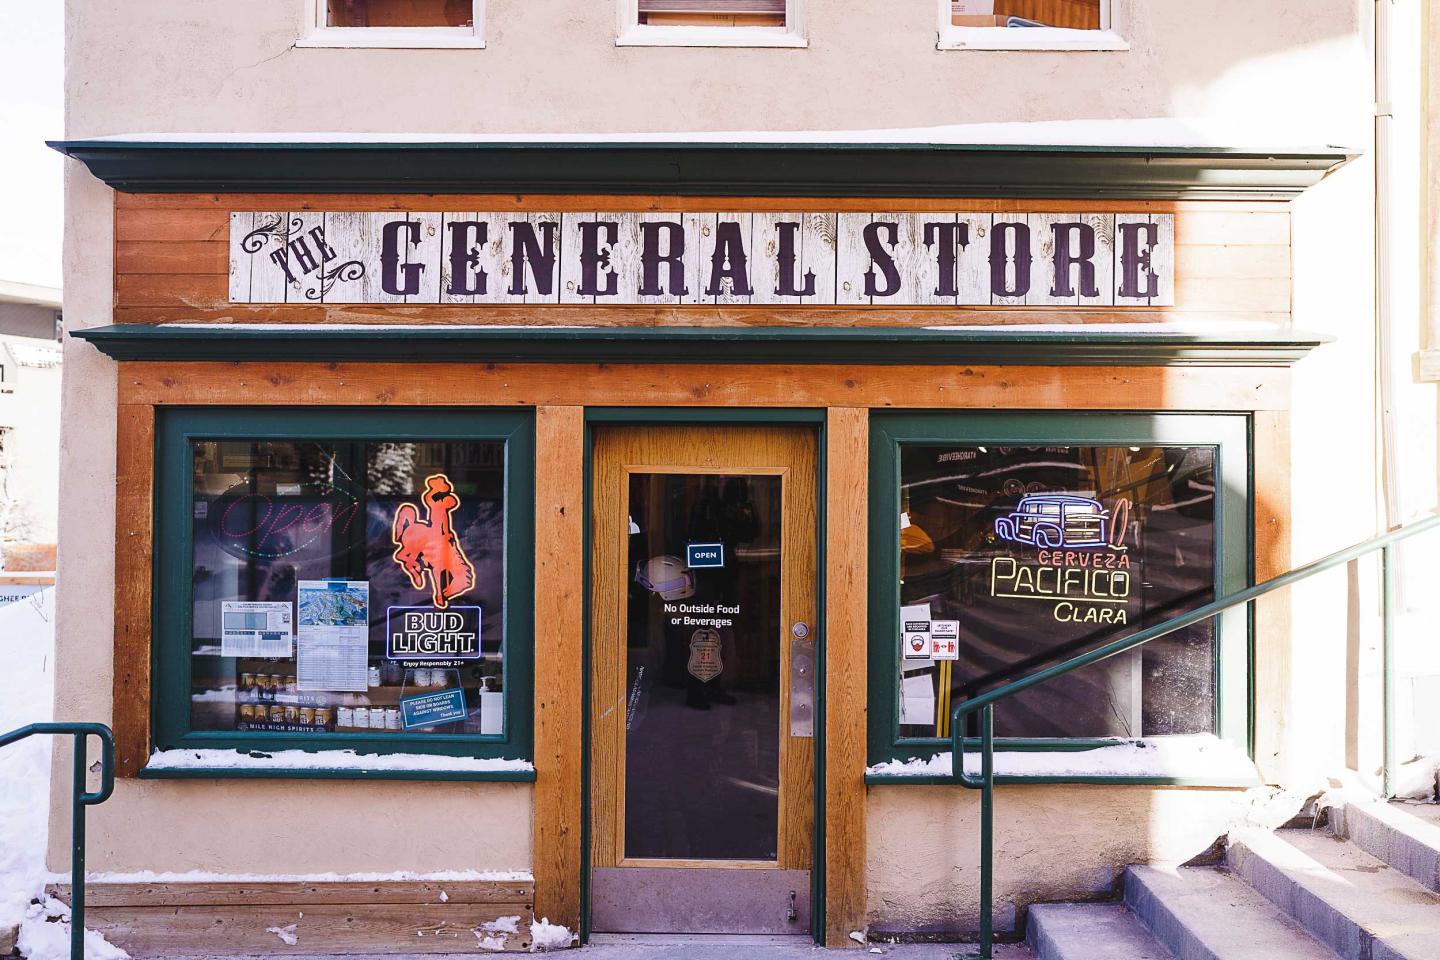 High West General Store